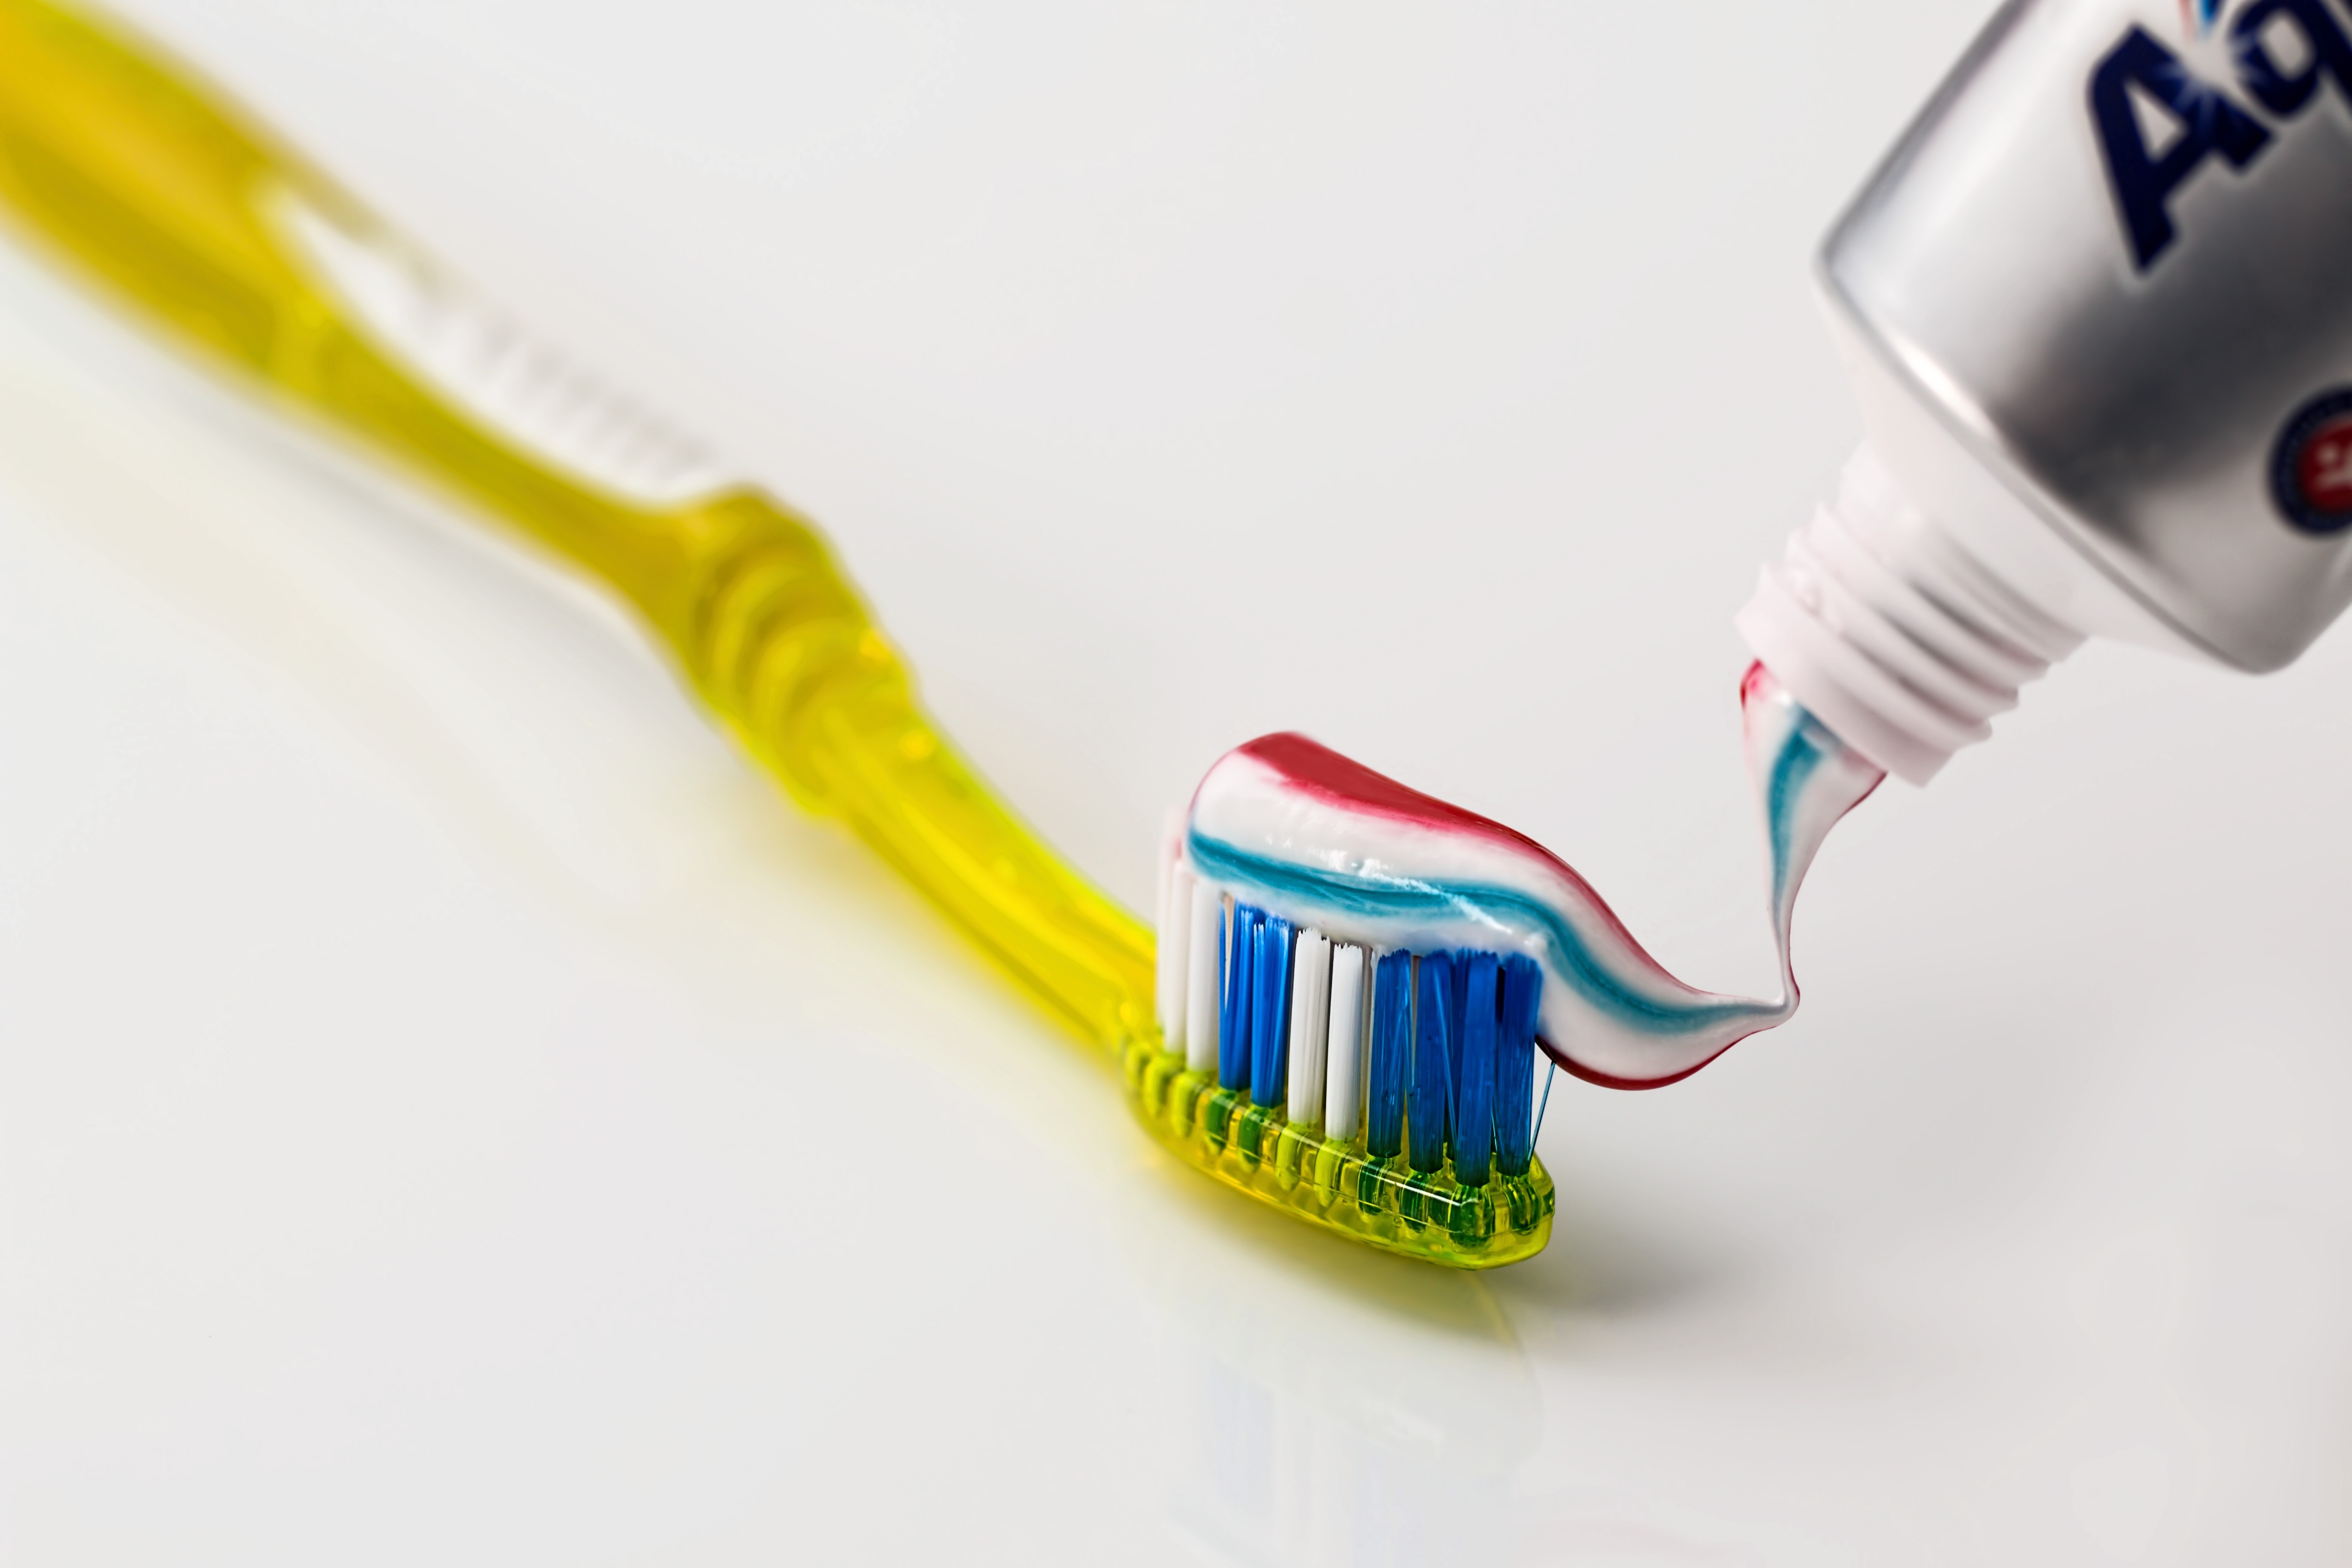 Personal care products like toothpaste are a common exposure for children under age 6